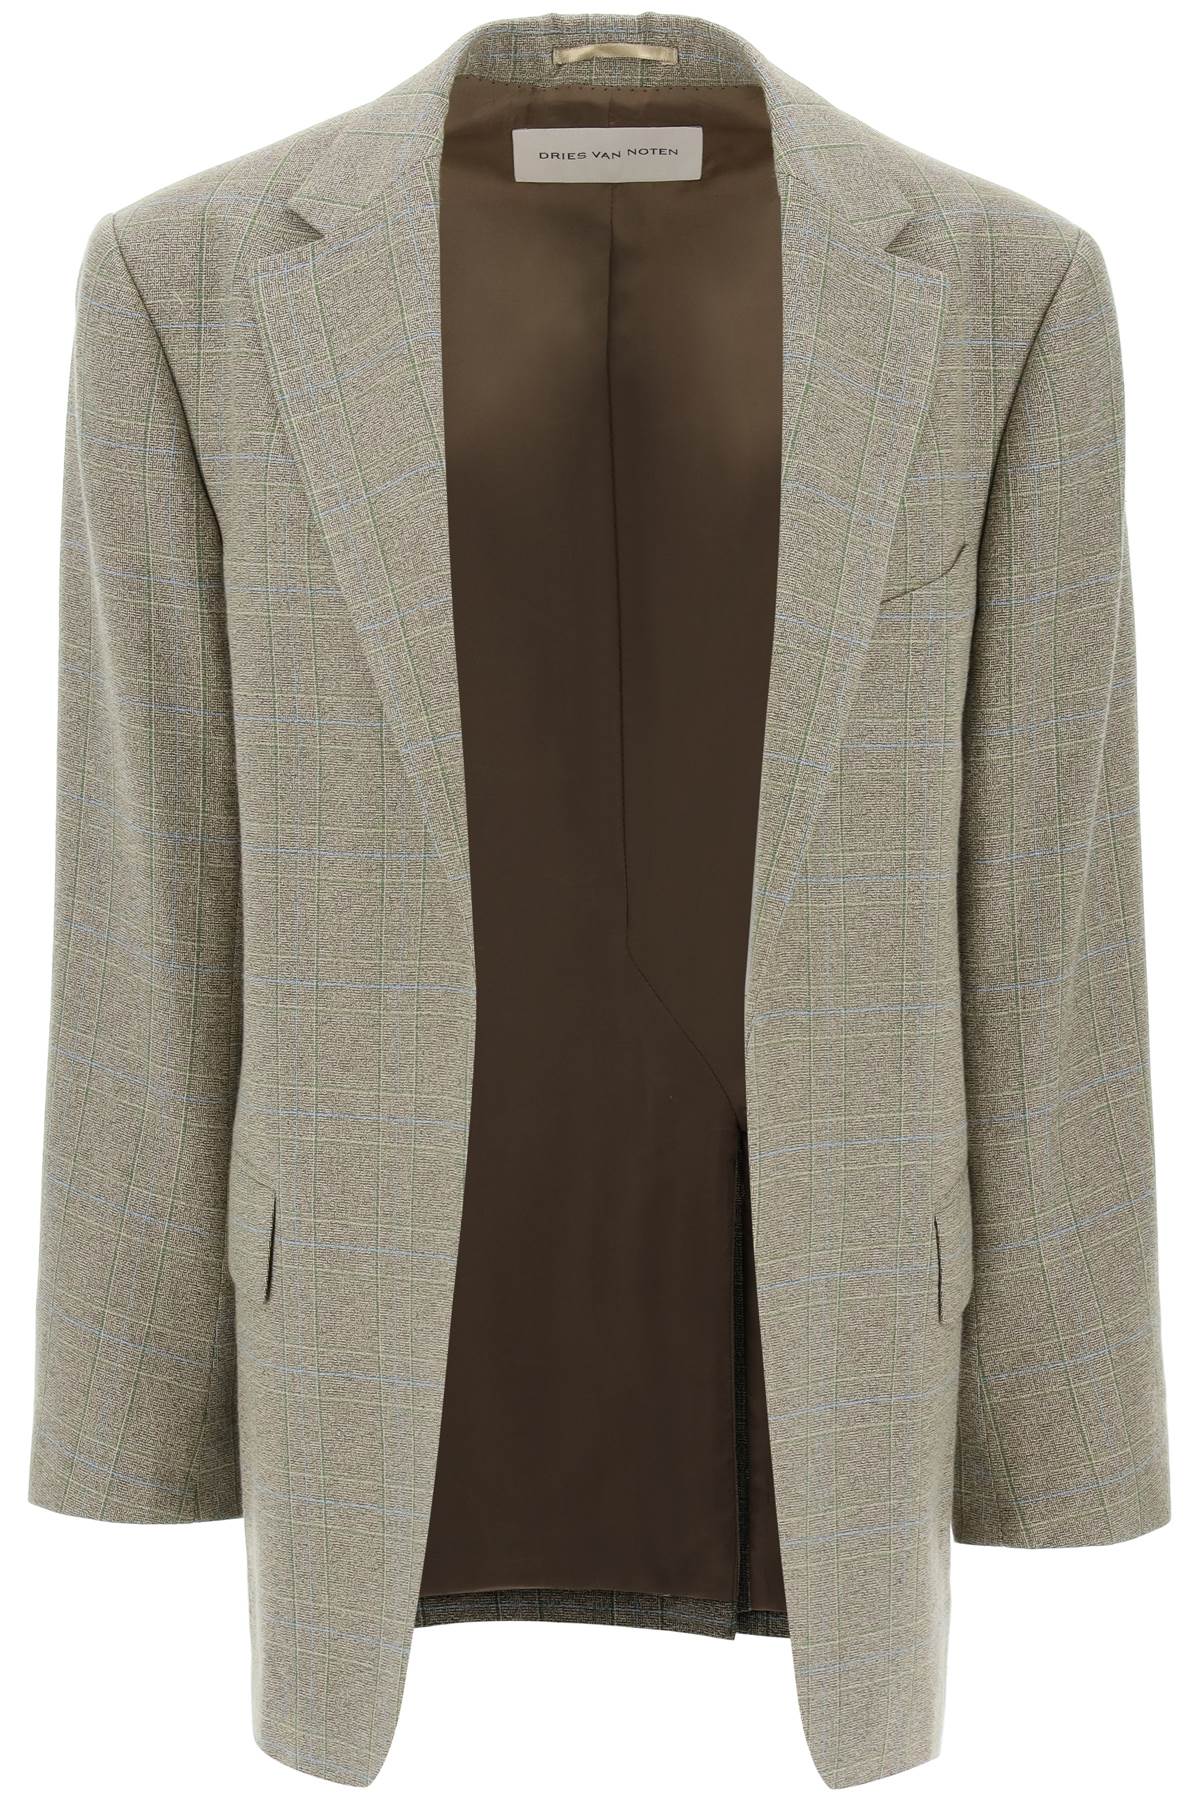 Dries Van Noten "checked Cotton Blend Blazer With Square In Green